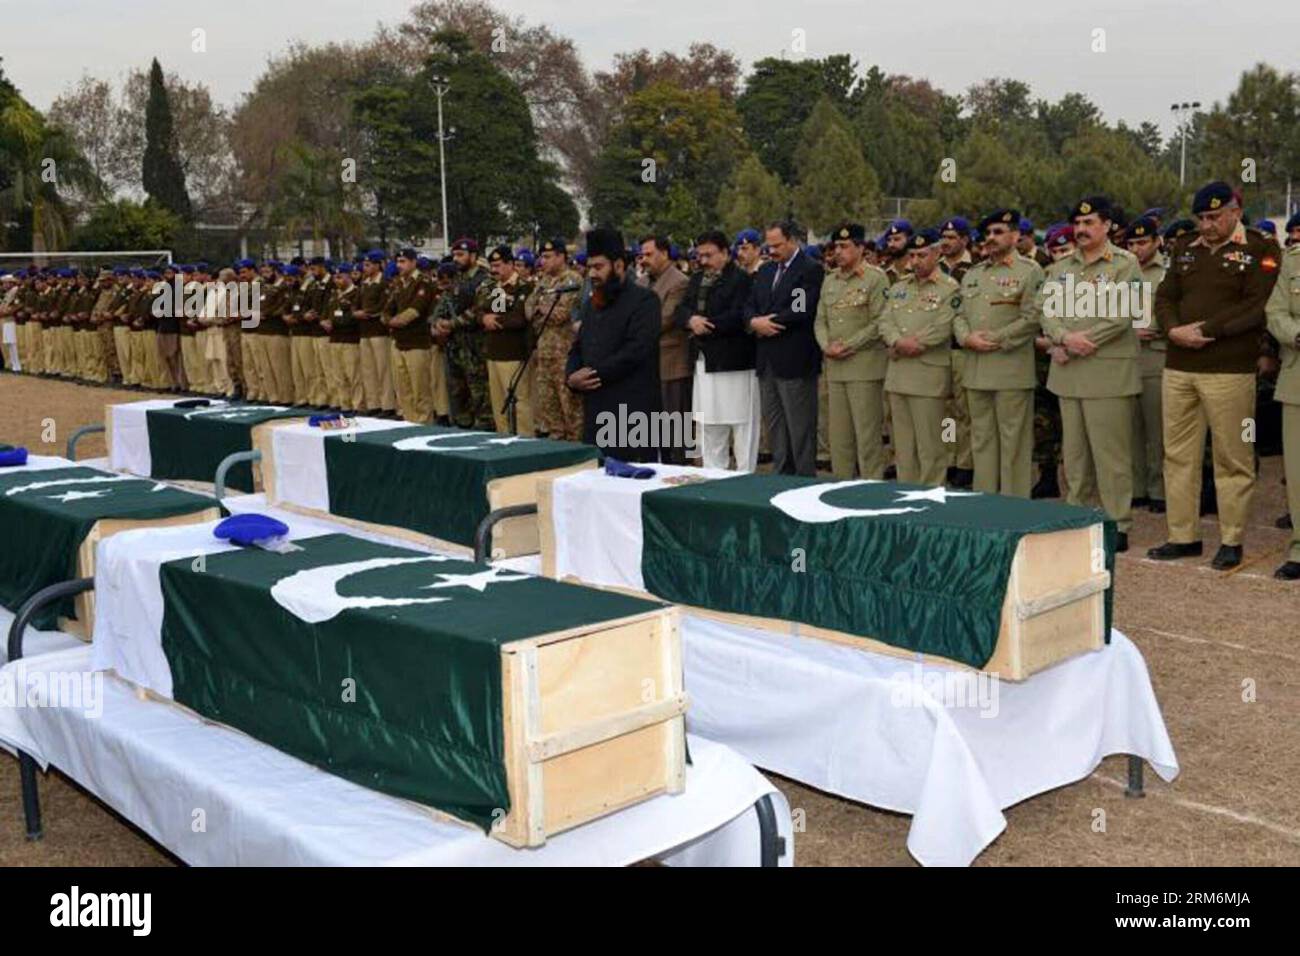 (140120) -- RAWALPINDI, Jan. 20, 2014 (Xinhua) -- Photo released by Pakistan Armed Forces Inter-Services Public Relations (ISPR) shows army officials mourn during the funeral of the victims killed in a suicide bomb blast in Rawalpindi, Pakistan, Jan. 20, 2014. At least 13 people were killed and over 20 others injured when a suicide bomber blew himself up near a police check post jointly owned by police and Pakistan army on Monday morning , officials said. (Xinhua/ISPR) (djj) PAKISTAN -RAWALPINDI-SUICIDE-ATTACK-FUNERAL PUBLICATIONxNOTxINxCHN   Rawalpindi Jan 20 2014 XINHUA Photo released by Pak Stock Photo